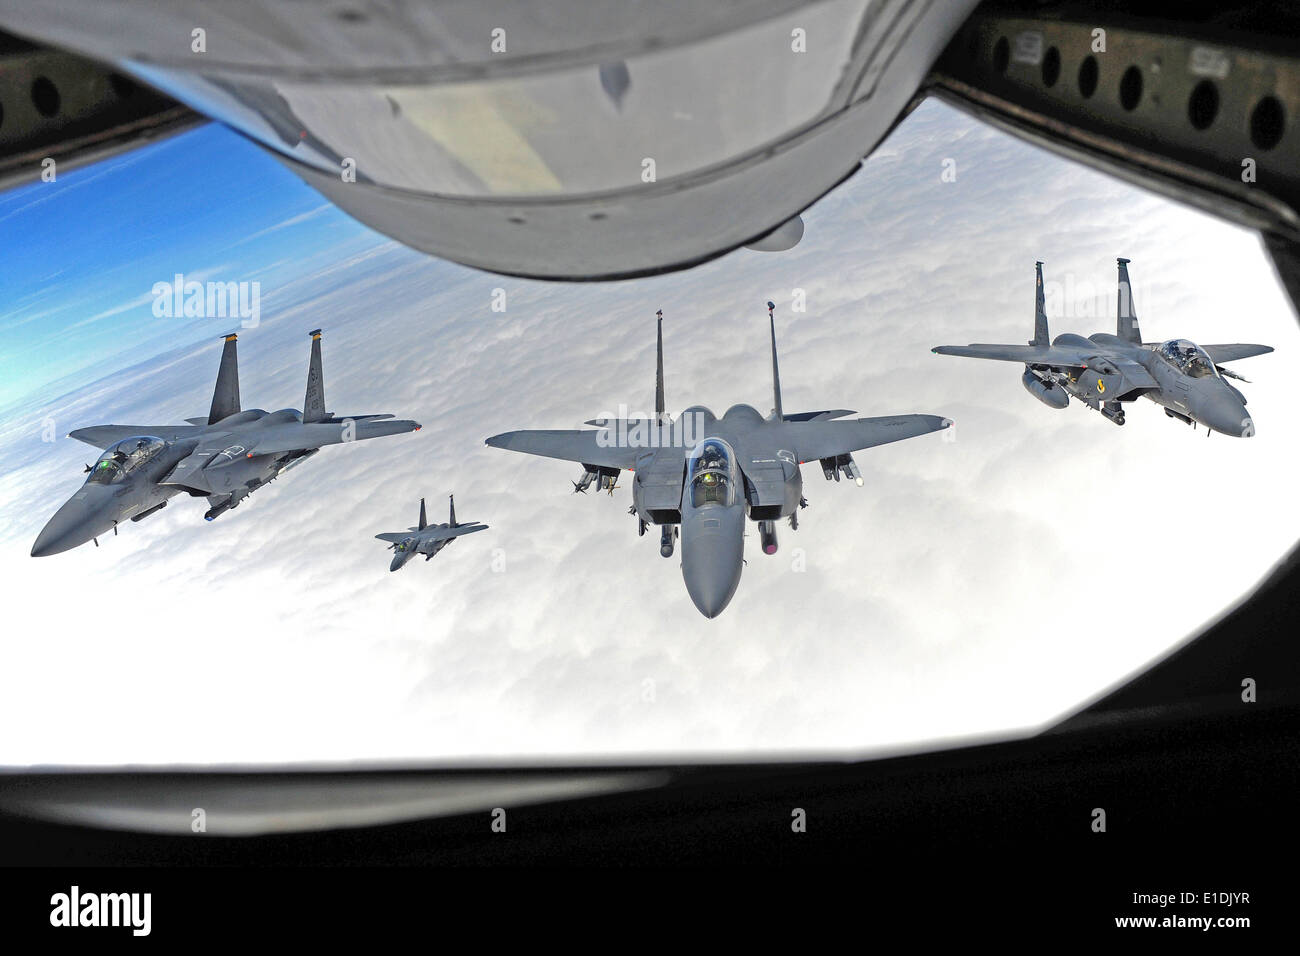 US Air Force pilot Col. Jeannie Leavitt, 4th Fighter Wing commander, approaches to refuel with fellow F-15E Strike Eagle fighter pilots on her final flight in command May 29, 2014 over North Carolina. Stock Photo